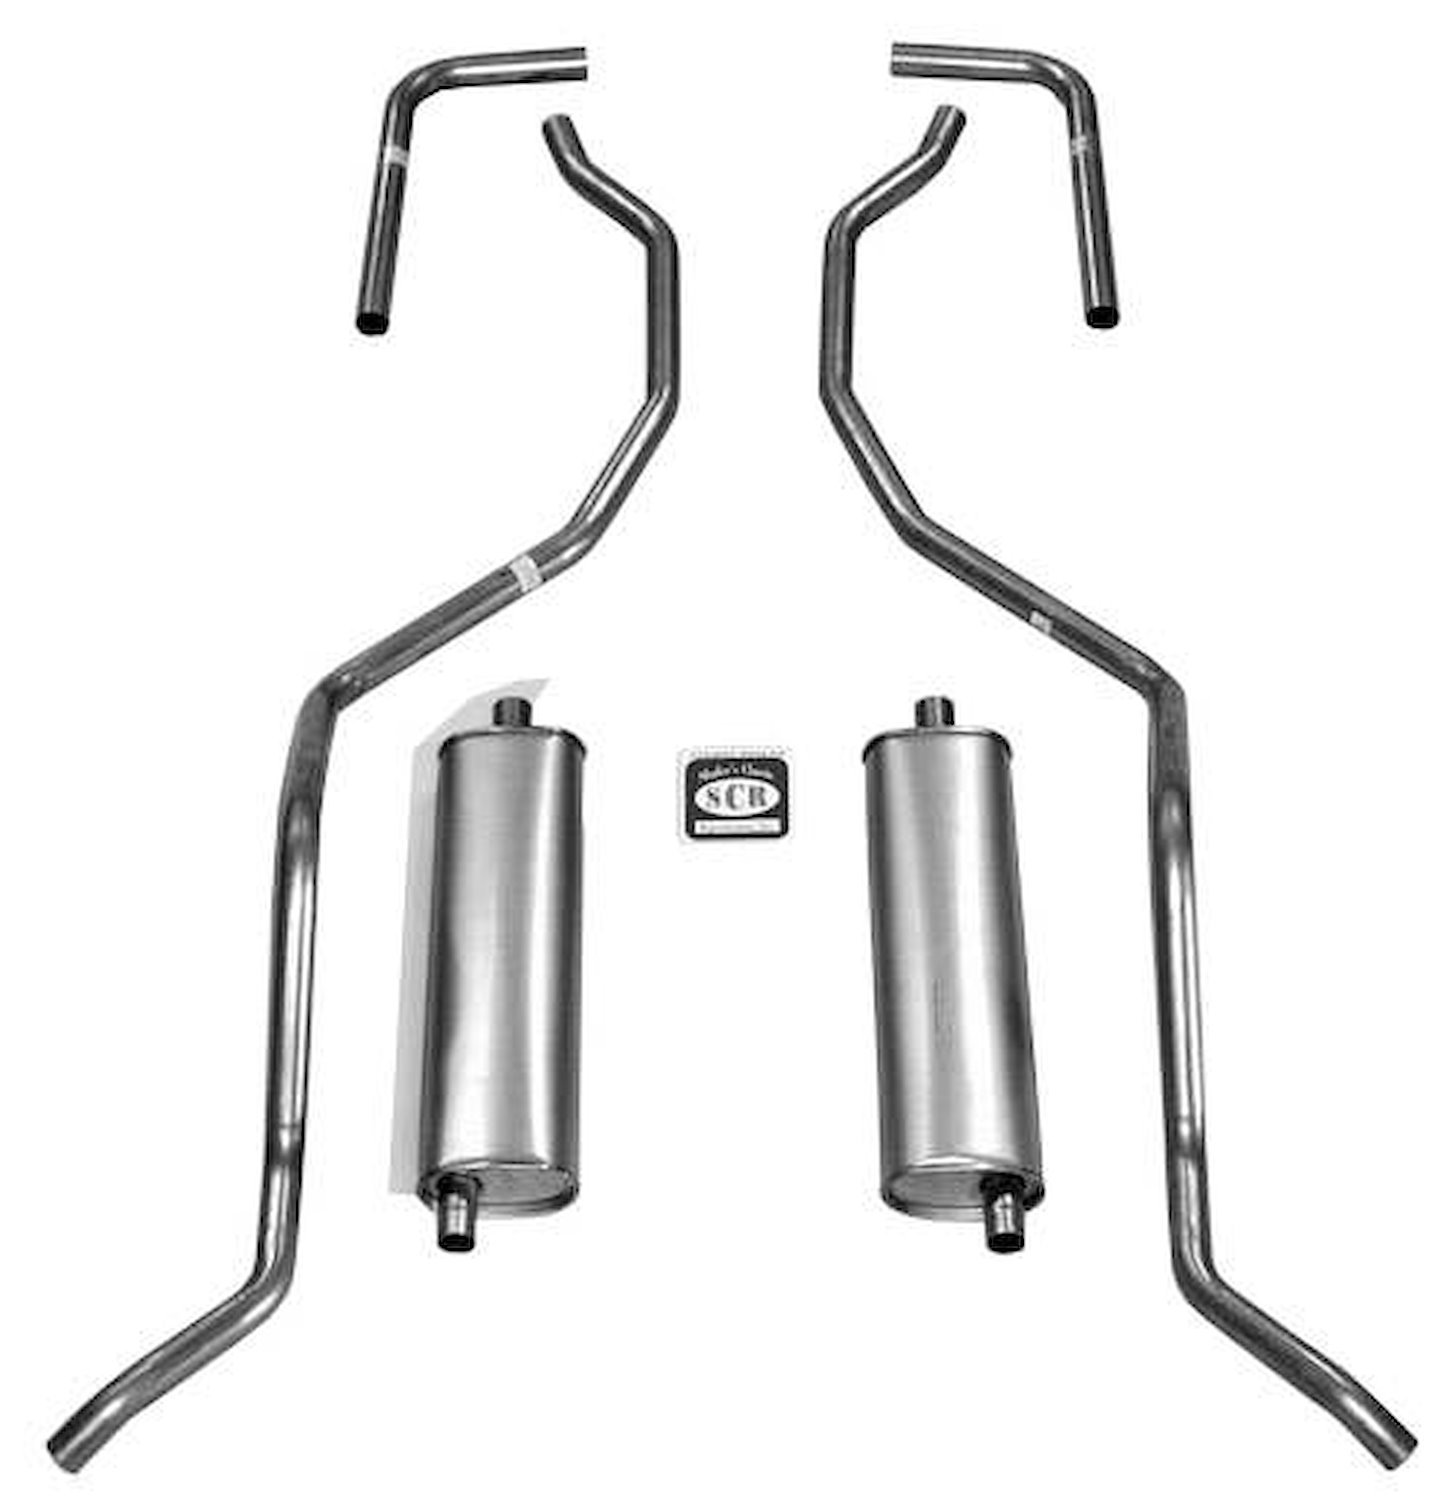 73047S 1960-1964 Chevrolet 2 in. Dual Exhaust System, 304 Stainless Steel